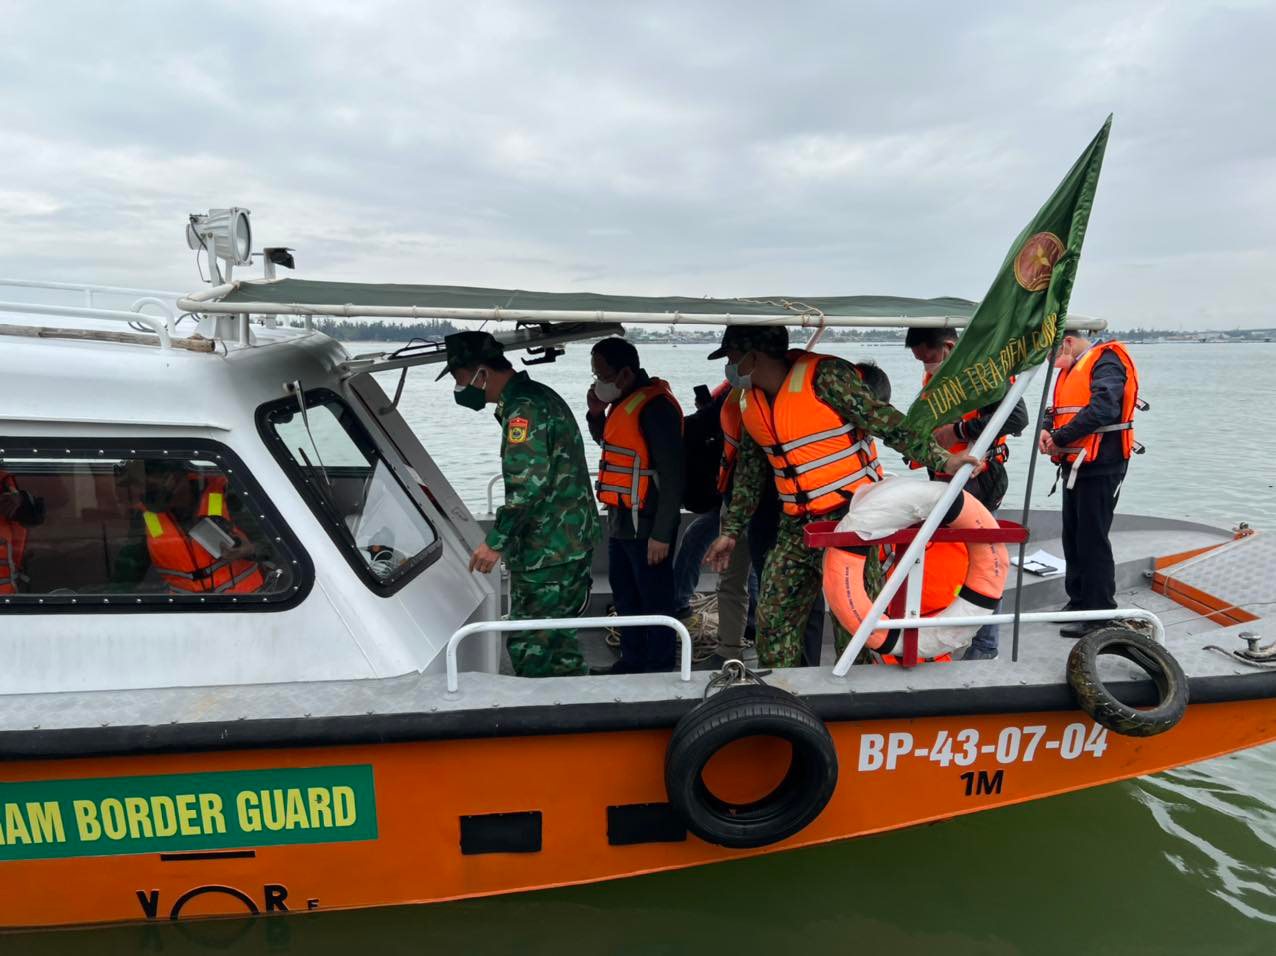 Death toll from capsized boat off central Vietnam rises to 15